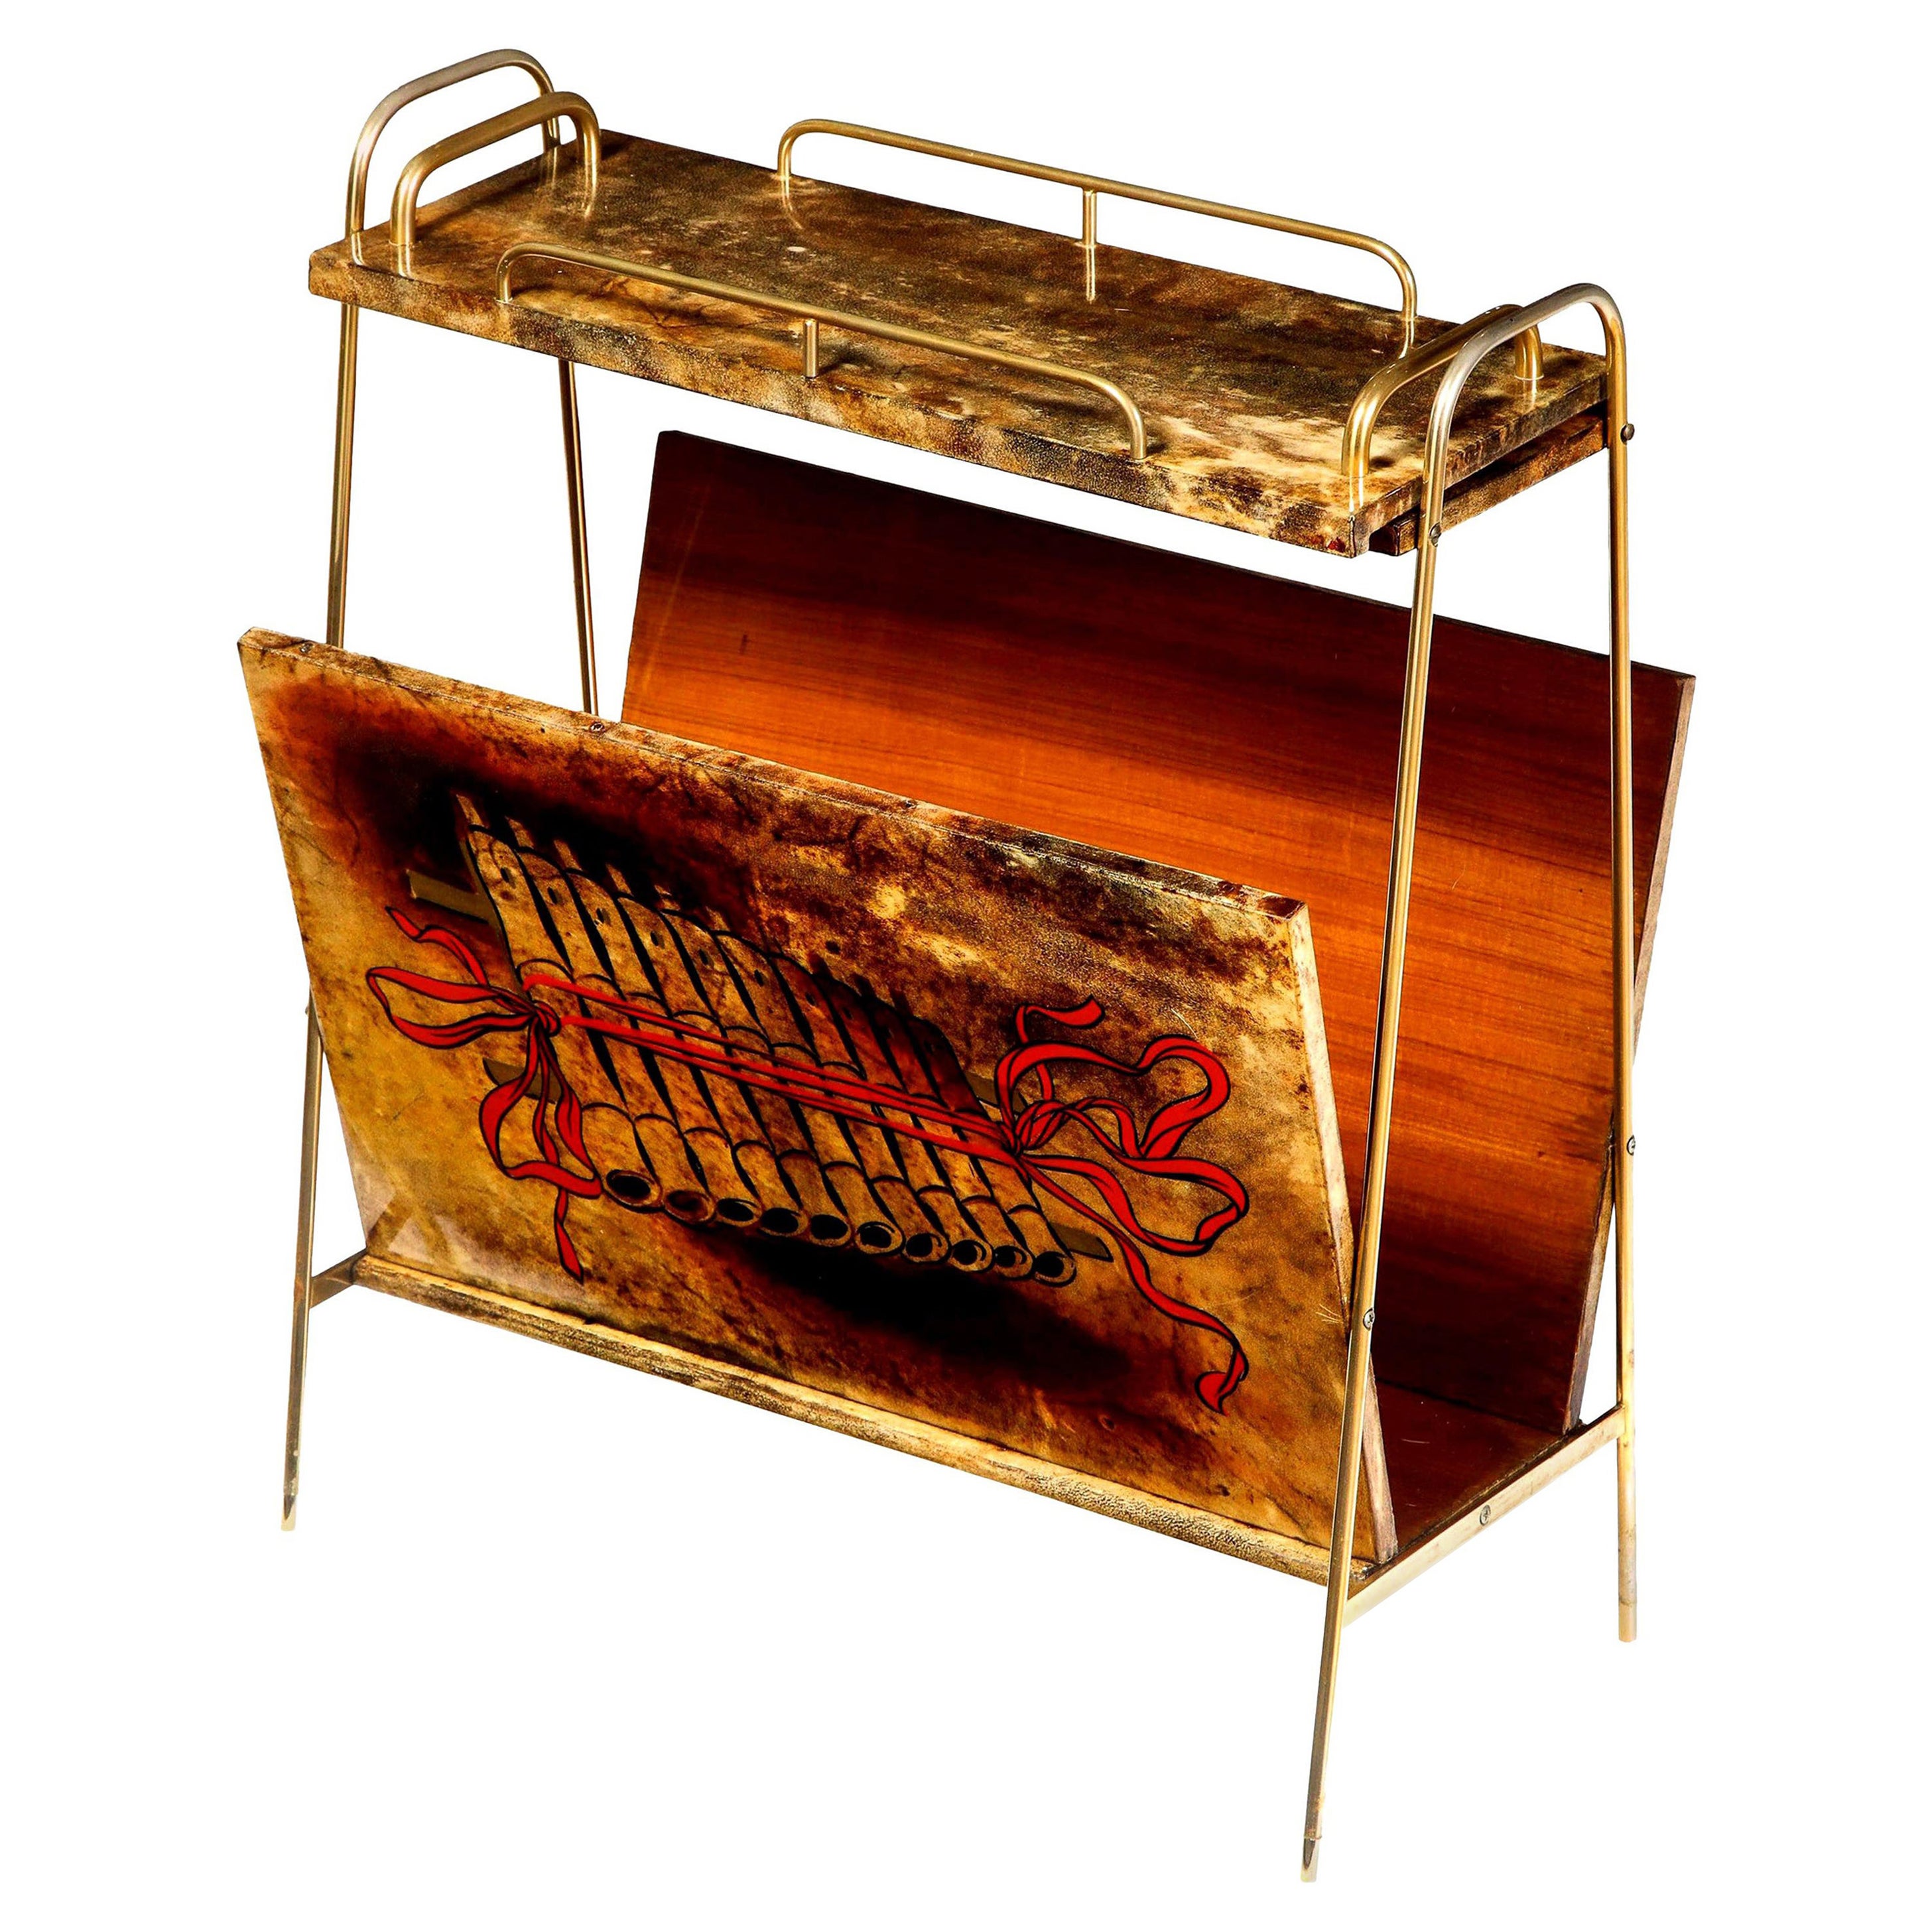 Magazine Stand by Aldo Tura, Goat Skin Parchment, Midcentury Italian, C 1950 For Sale